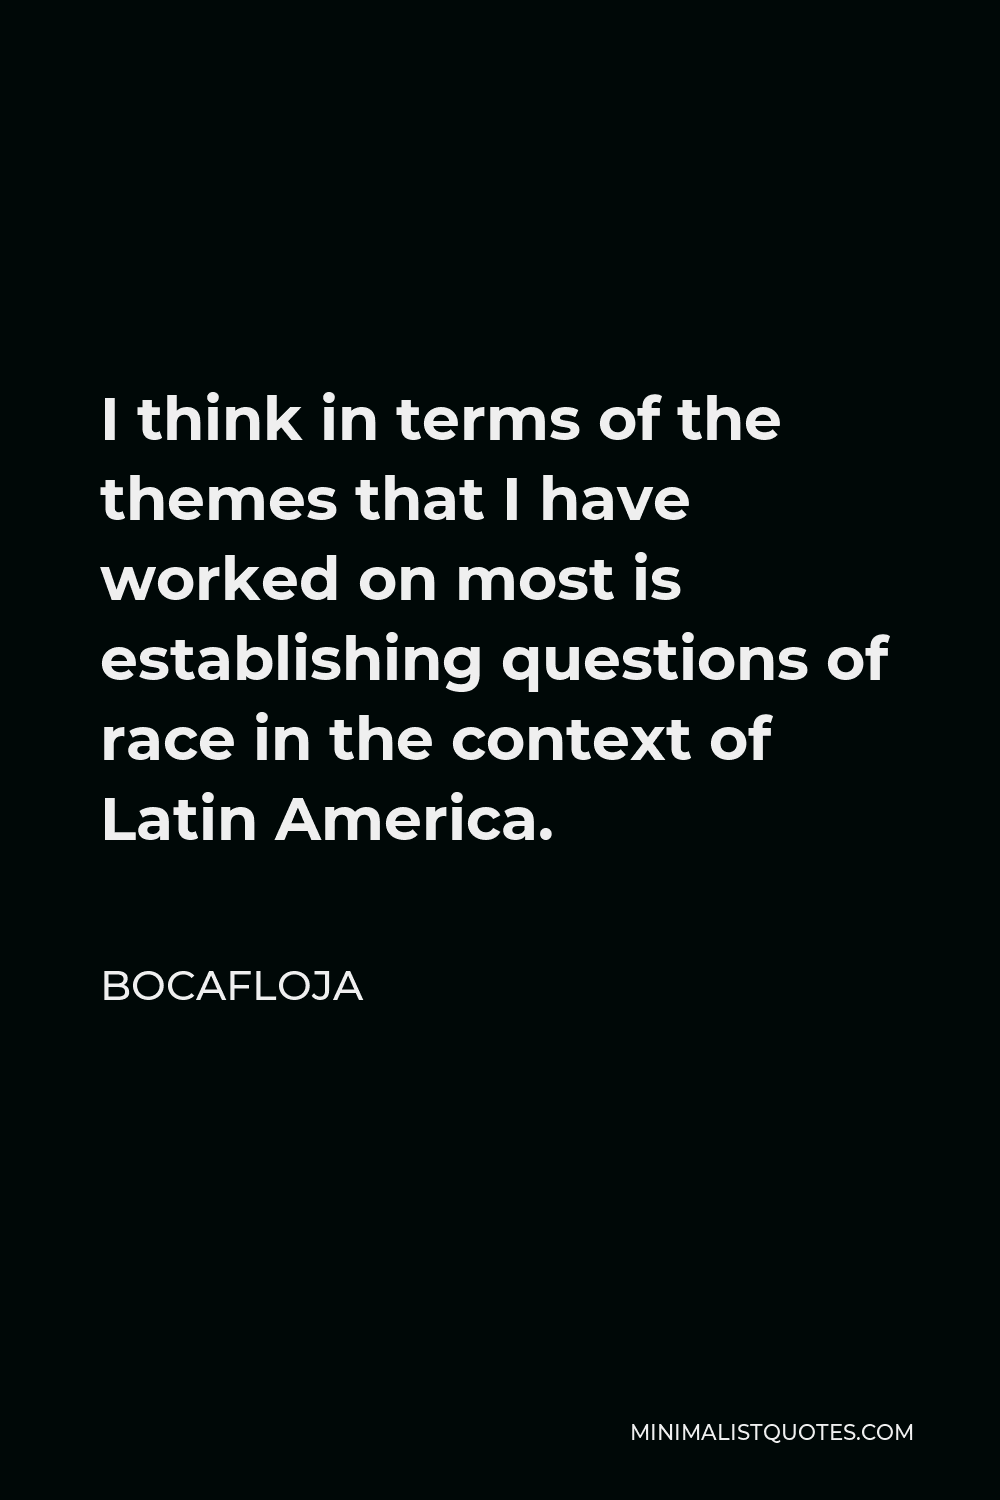 Bocafloja Quote - I think in terms of the themes that I have worked on most is establishing questions of race in the context of Latin America.